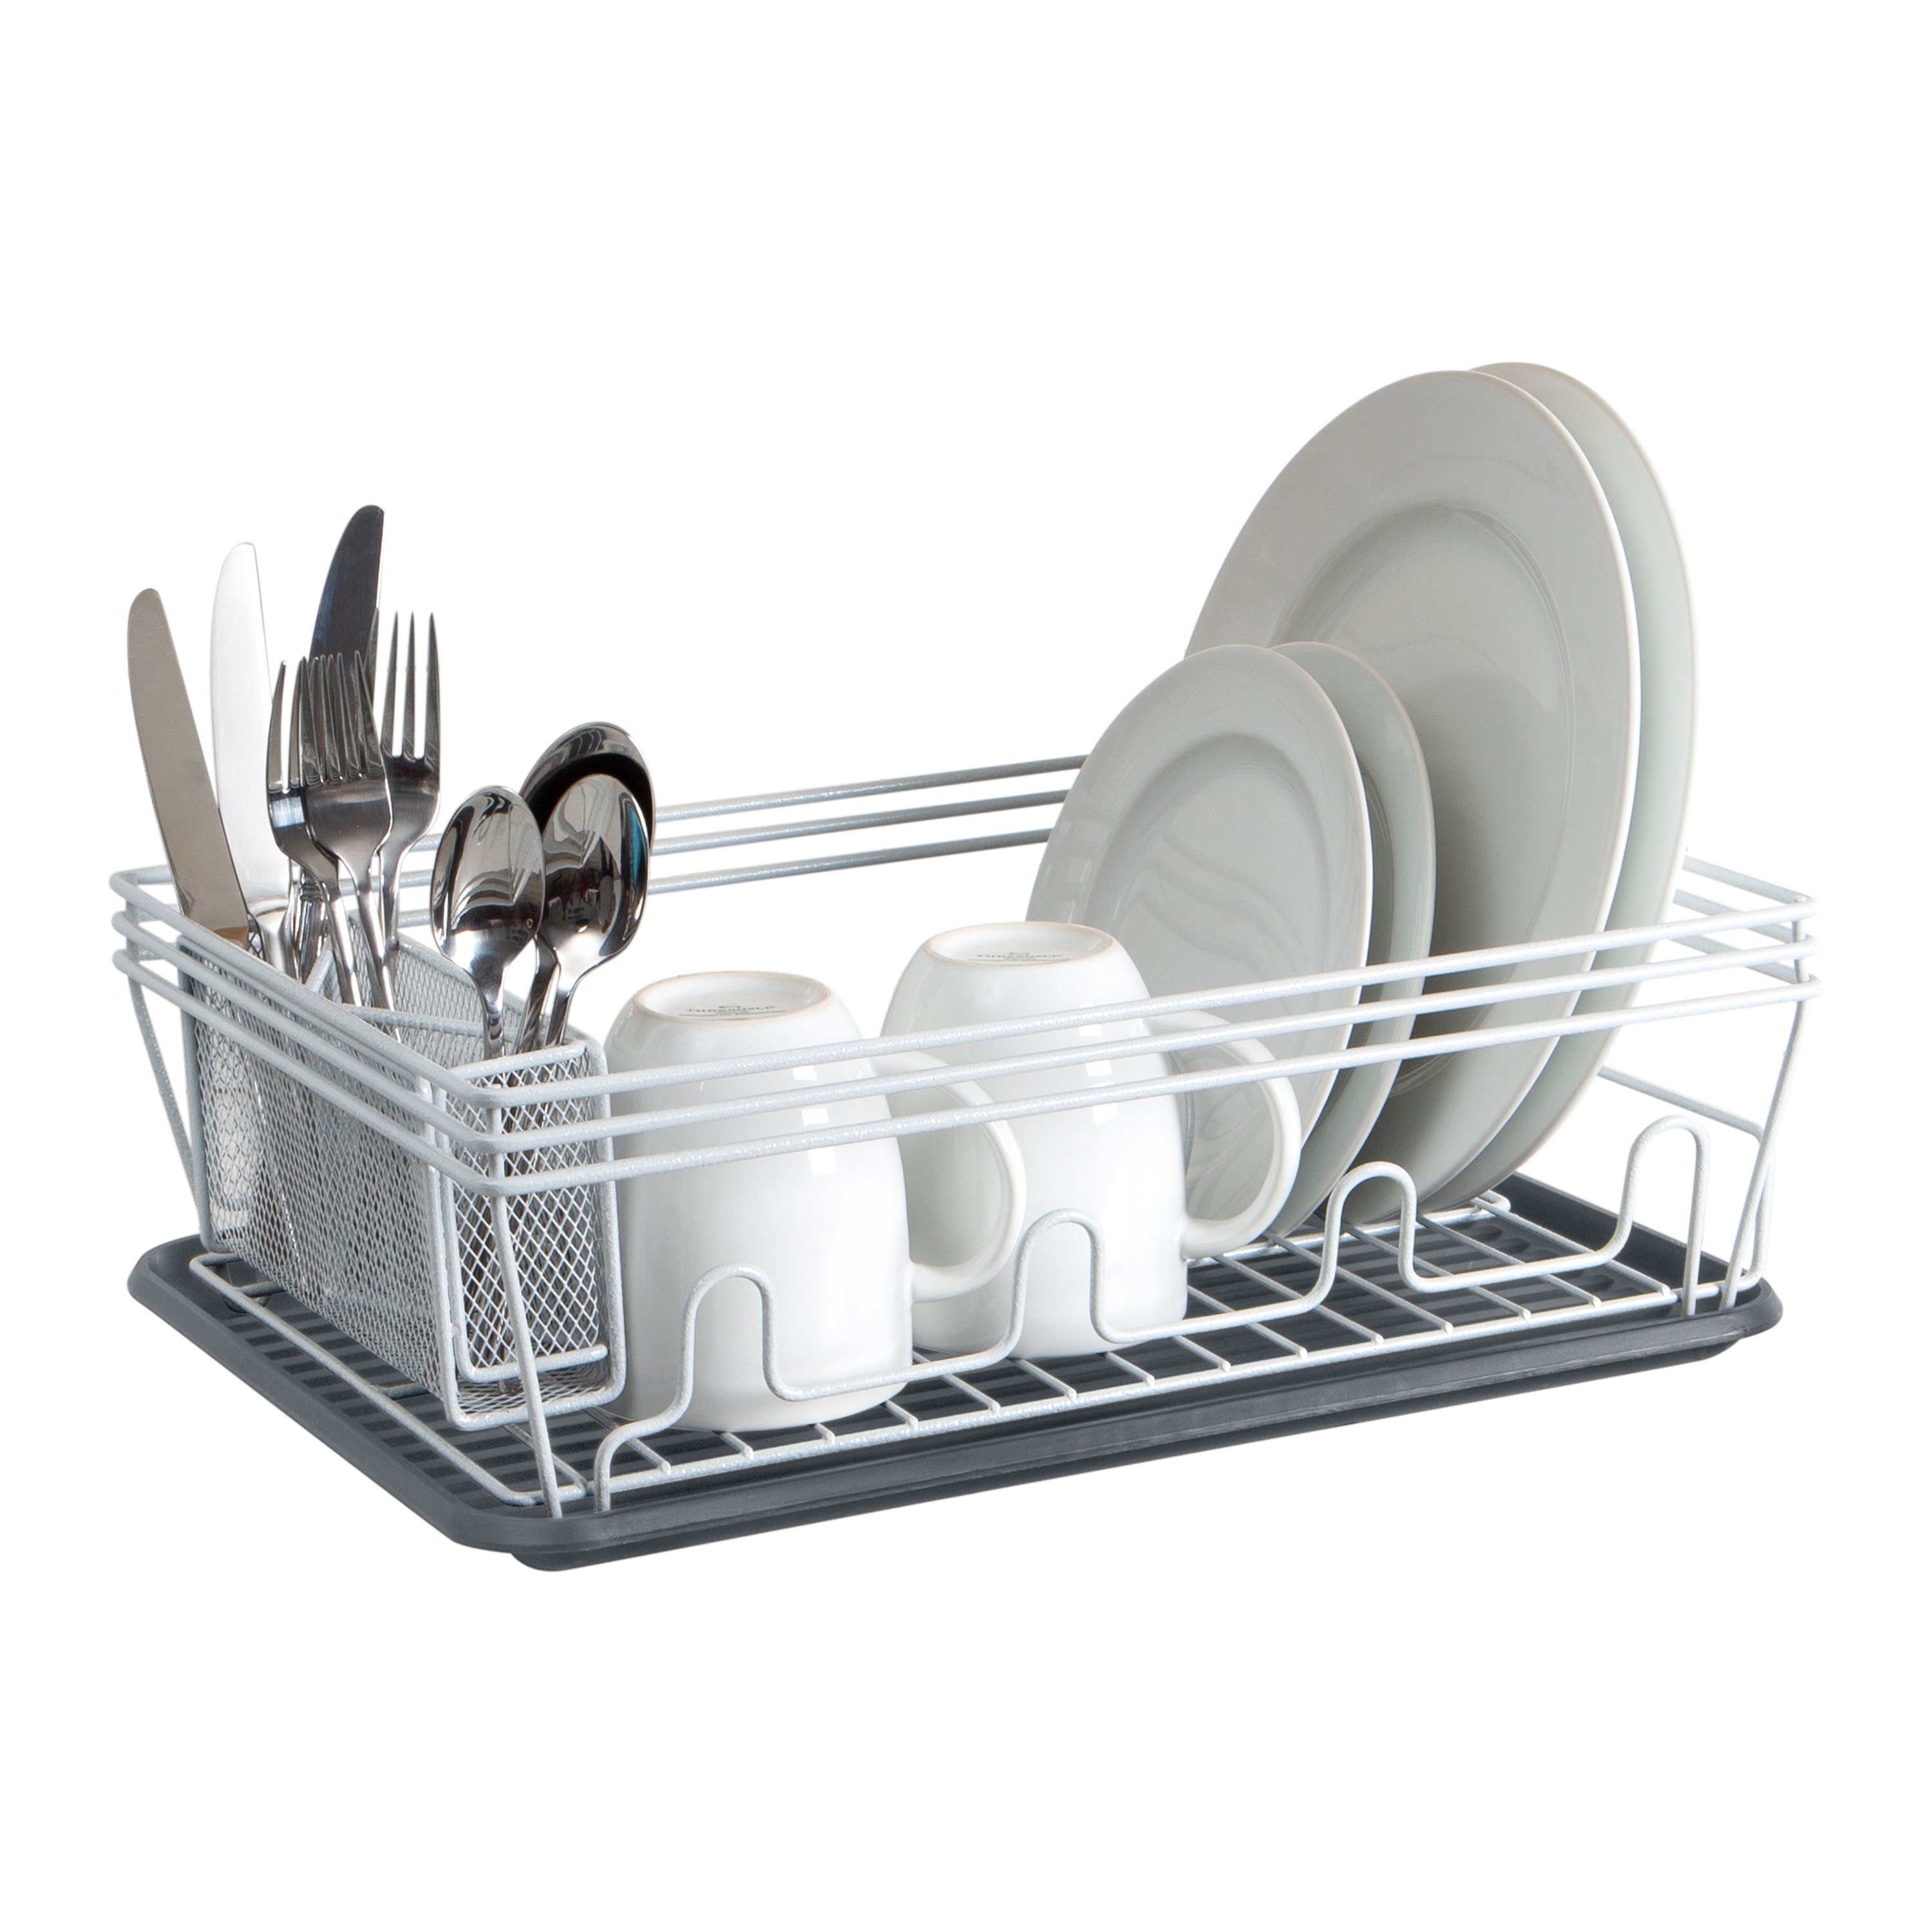 https://ak1.ostkcdn.com/images/products/is/images/direct/23df15d80677199c42825c749004b8fae567f5d4/Laura-Ashley-Speckled-Dish-Rack-Set-in-Grey.jpg